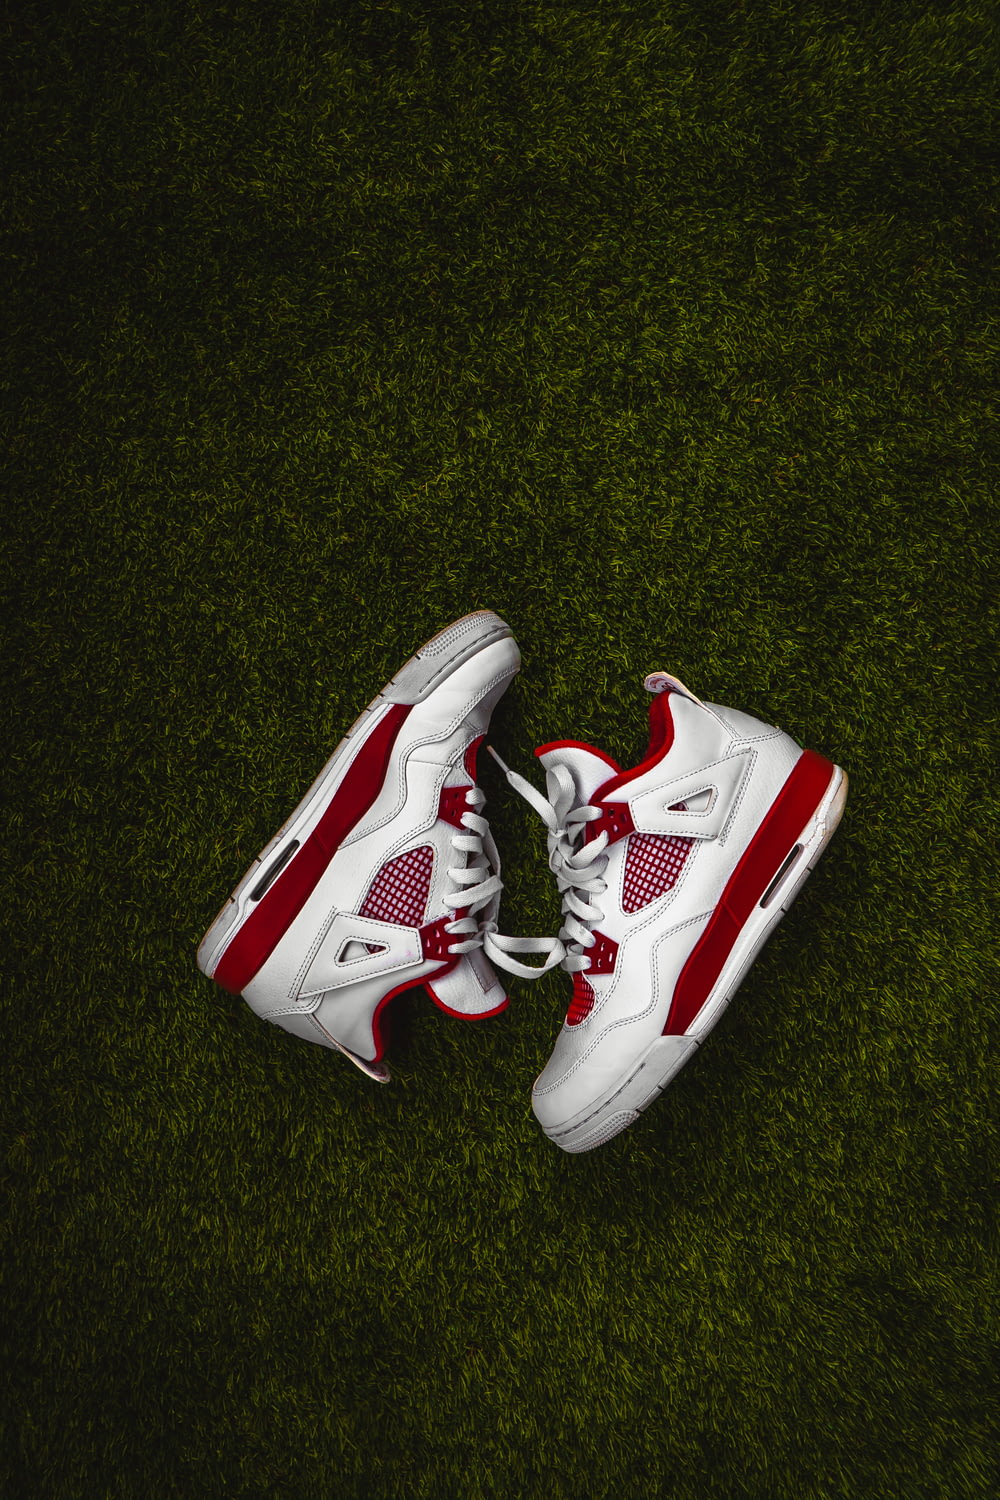 white and red nike basketball shoes on green grass